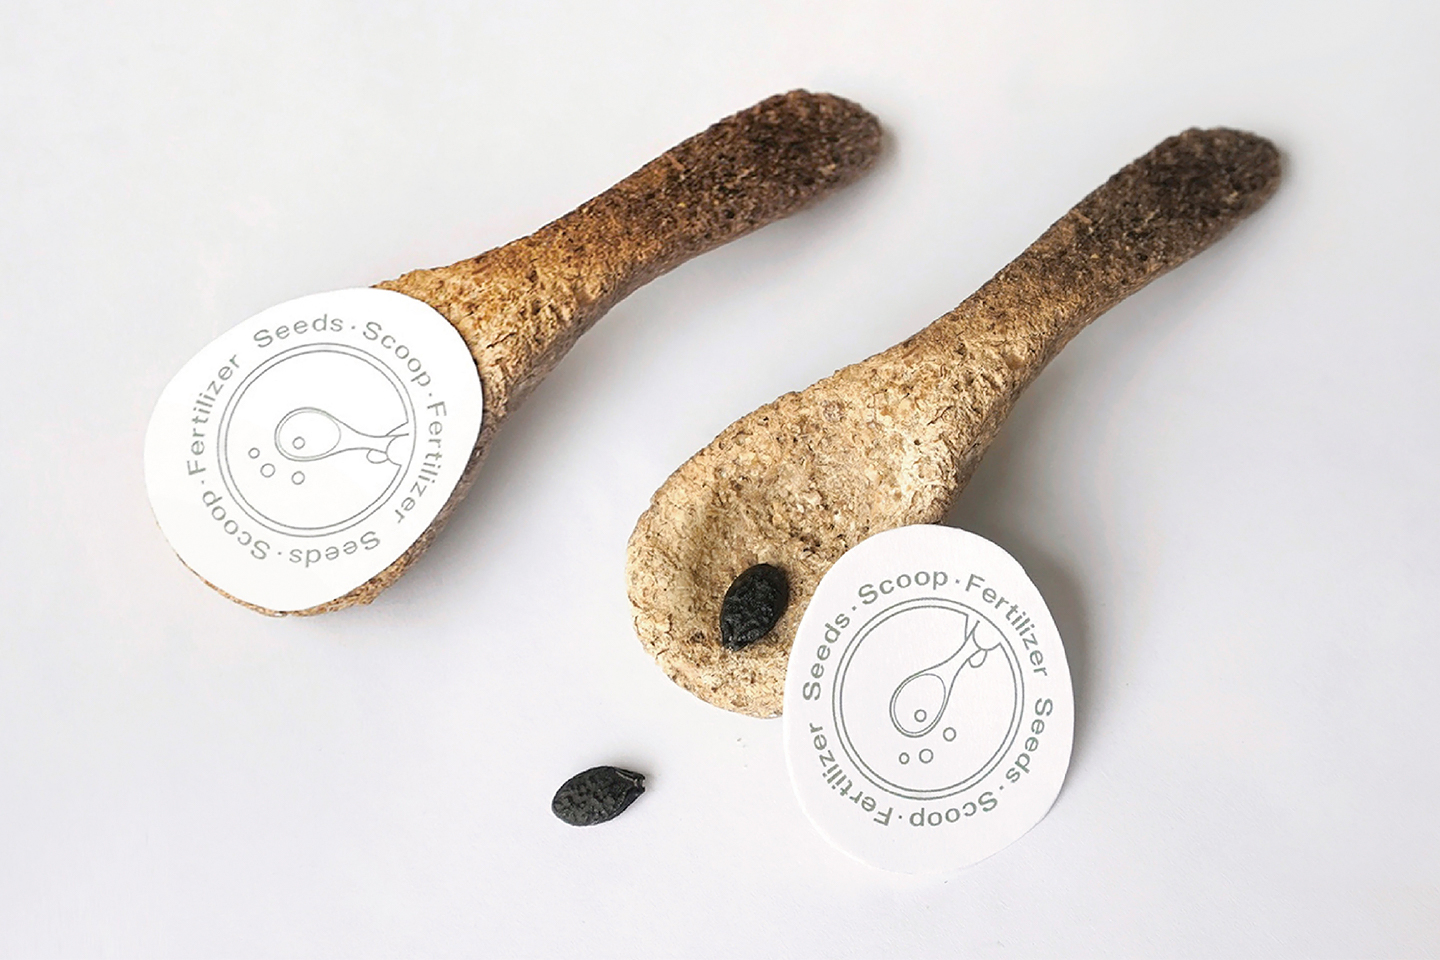 This compostable flower scoop made from peanut shells is an award-winning packaging design!